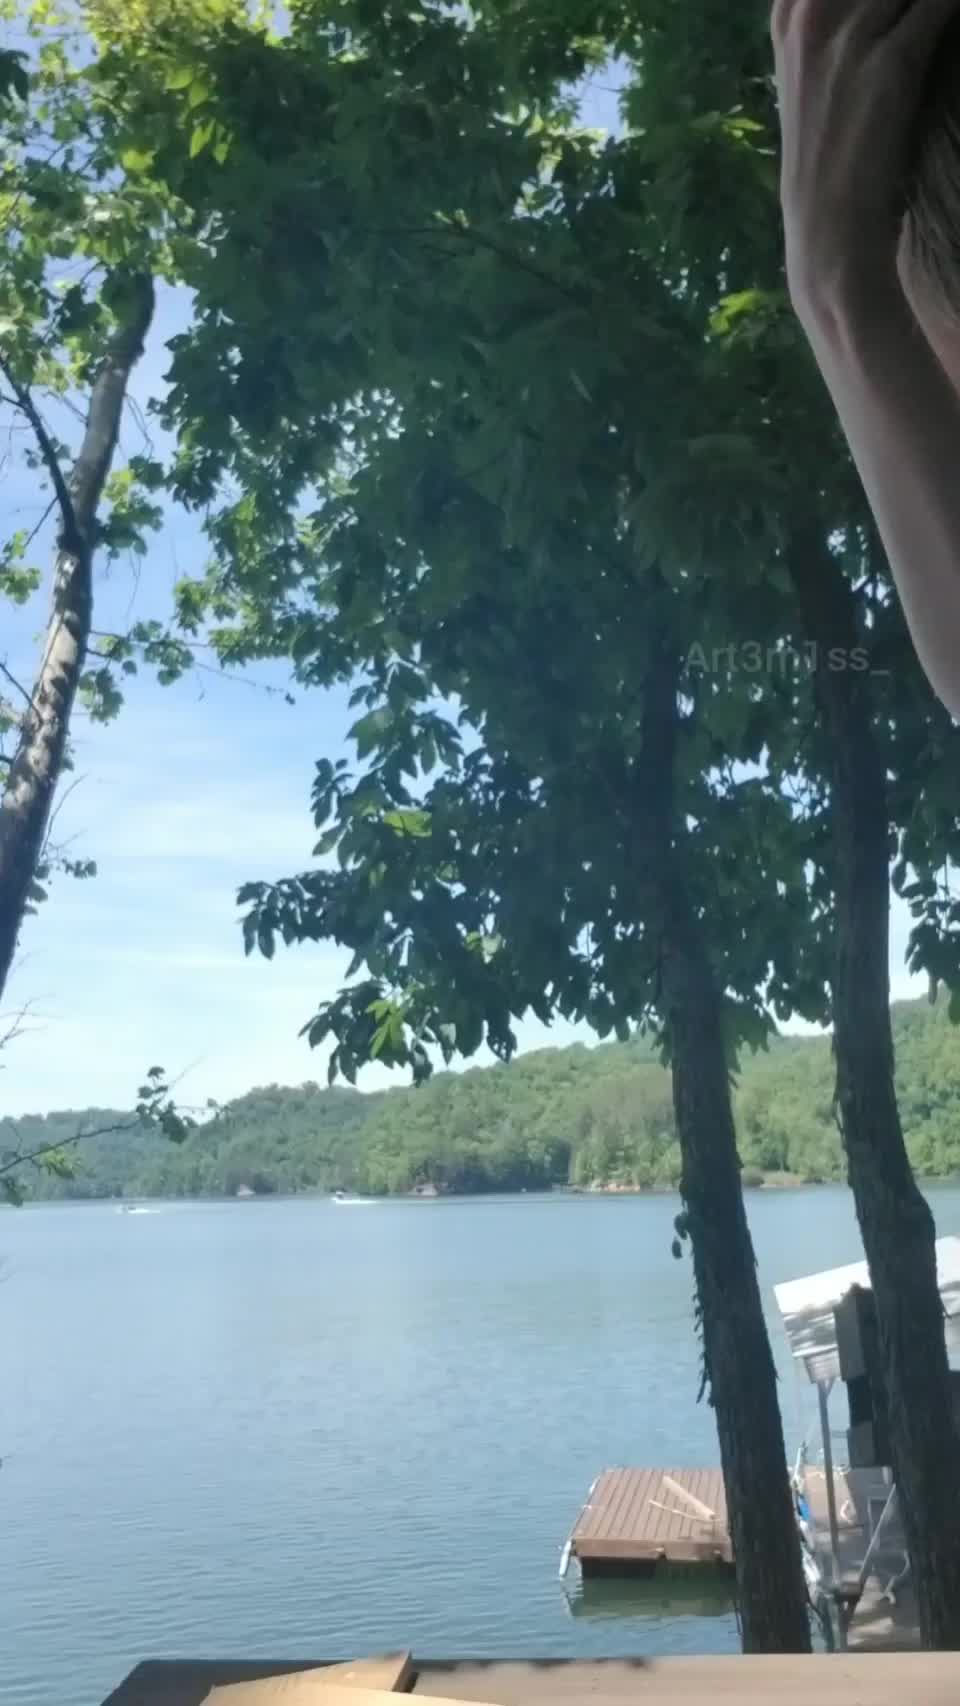 Showing off my perky tits by the lake [gif] : video clip